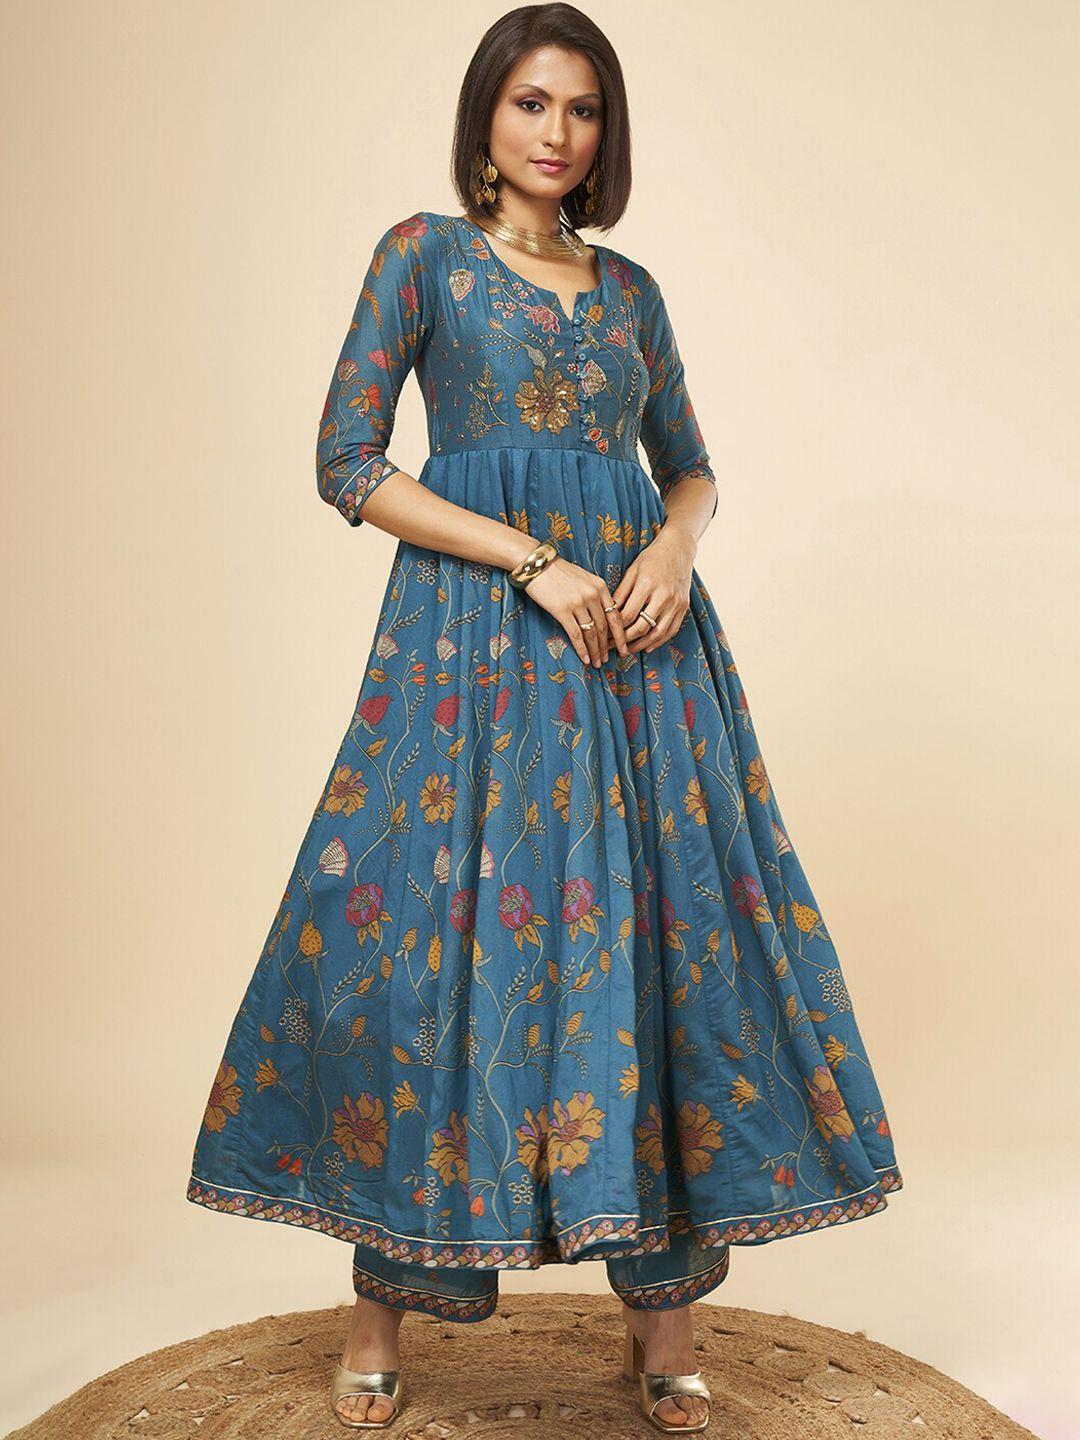 marigold lane ethnic motifs embroidered angrakha chanderi silk kurta with trousers & with